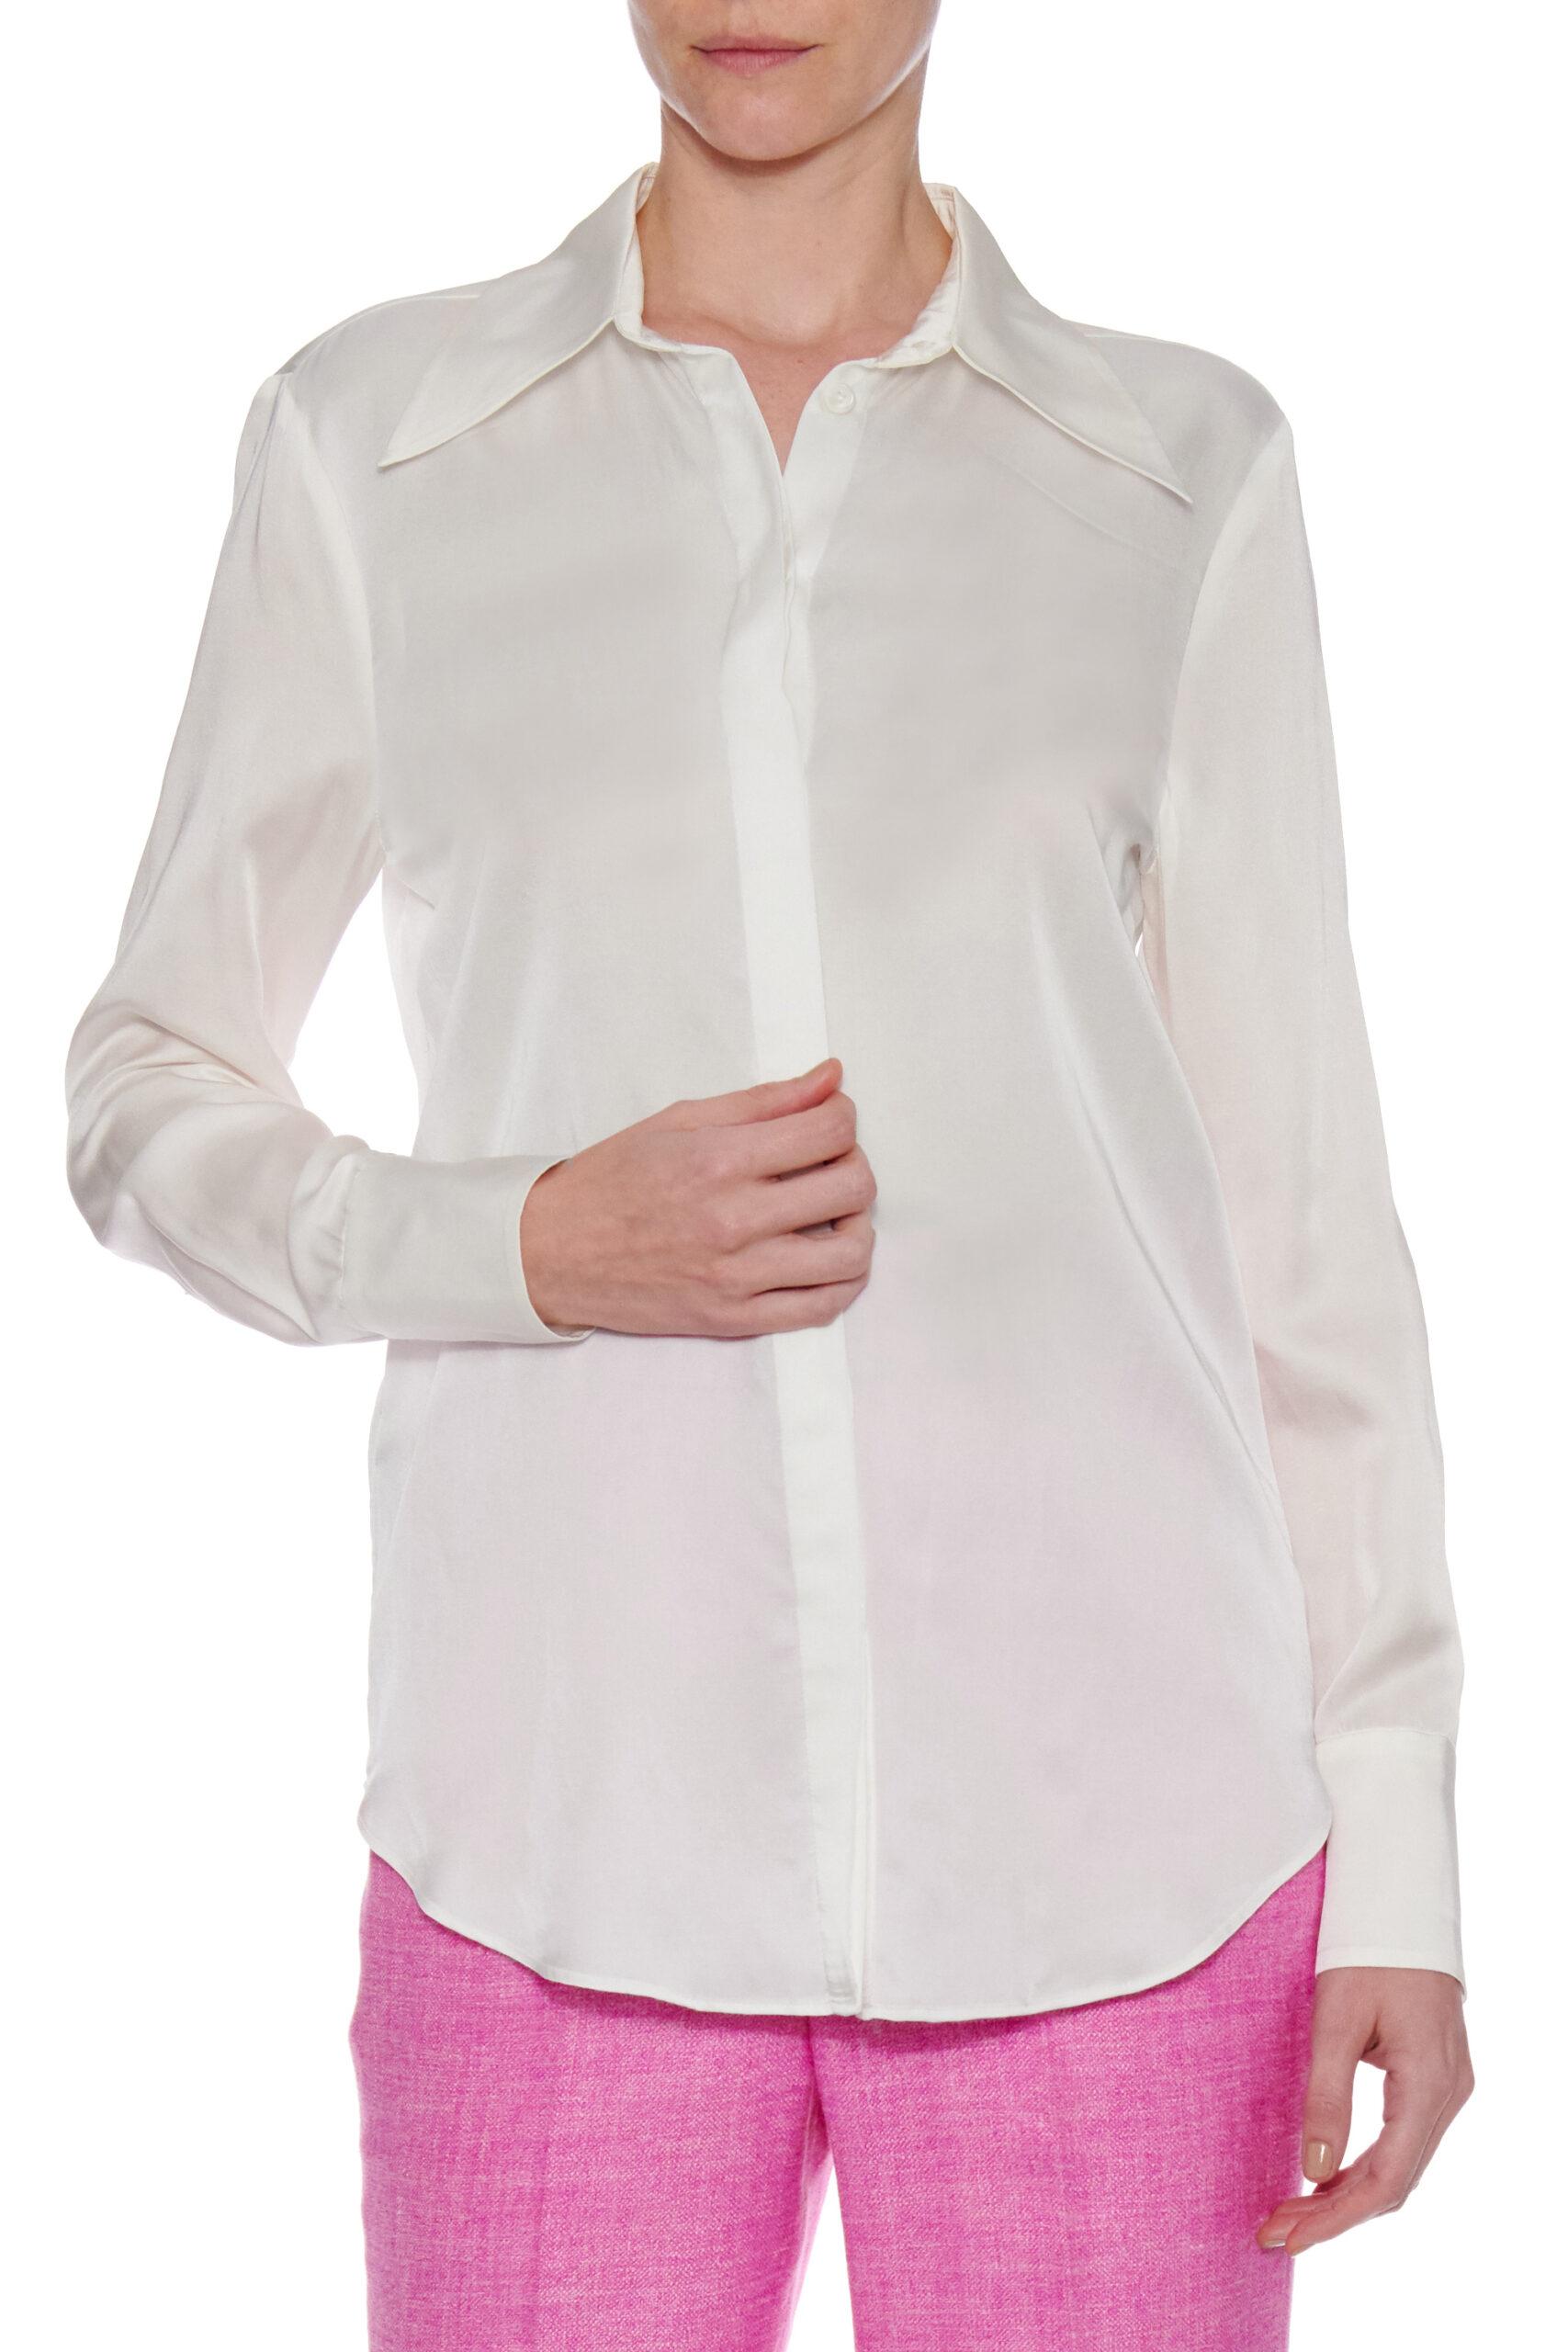 Montrieul Shirt – Button-down long sleeve blouse in white0